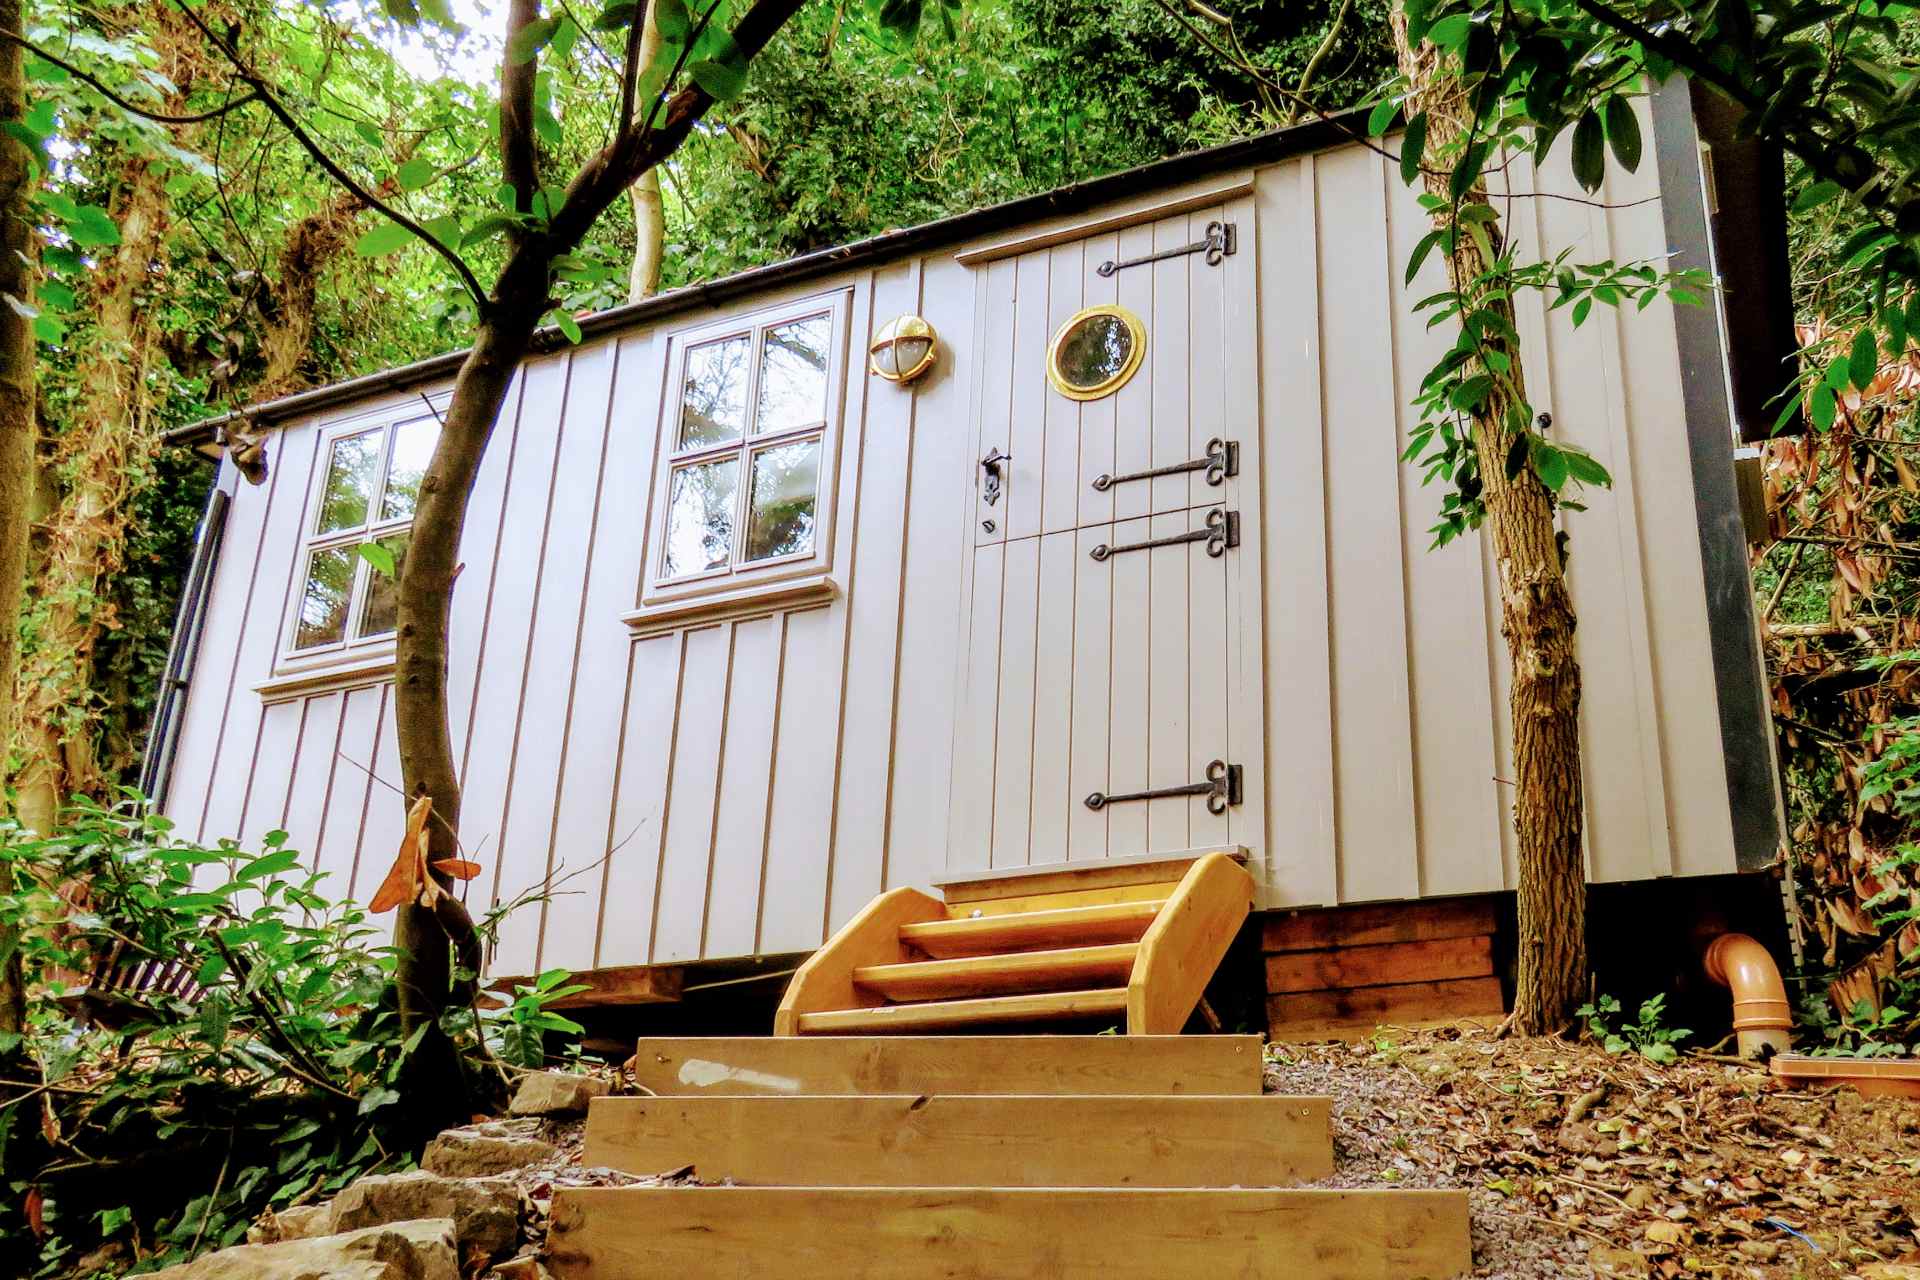 steps-leading-up-to-the-old-mill-shepherds-hut-amid-trees-glamping-with-hot-tub-ireland